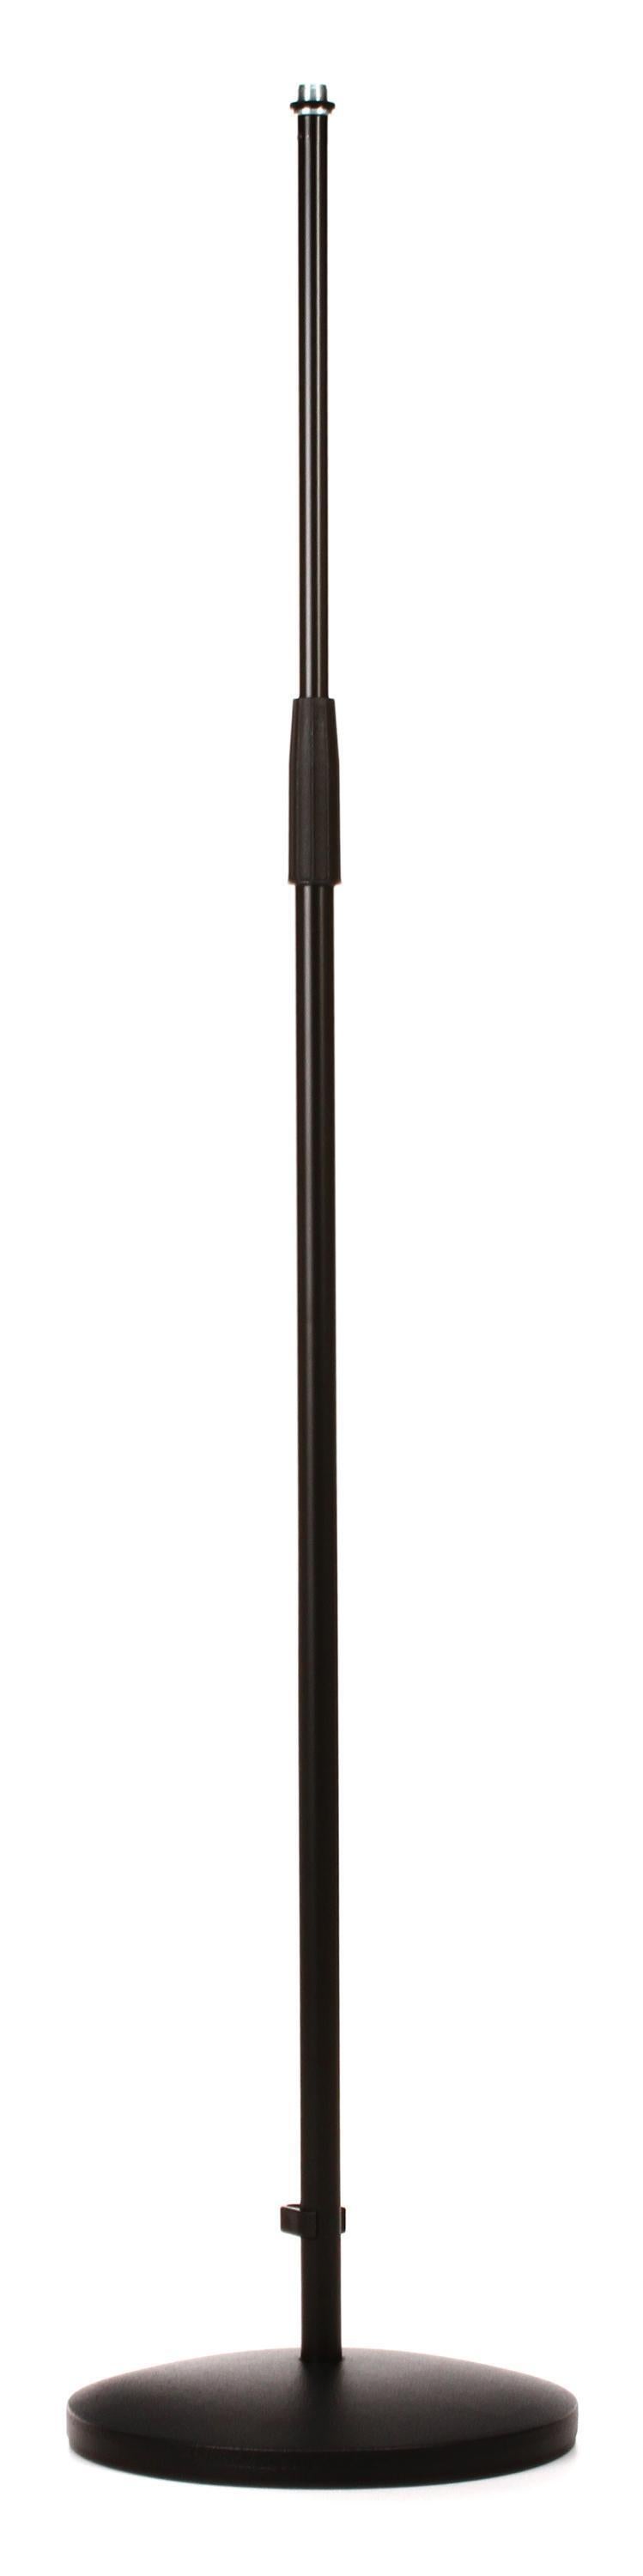 K&M 260/1 Round-base Microphone Stand - Black | Sweetwater